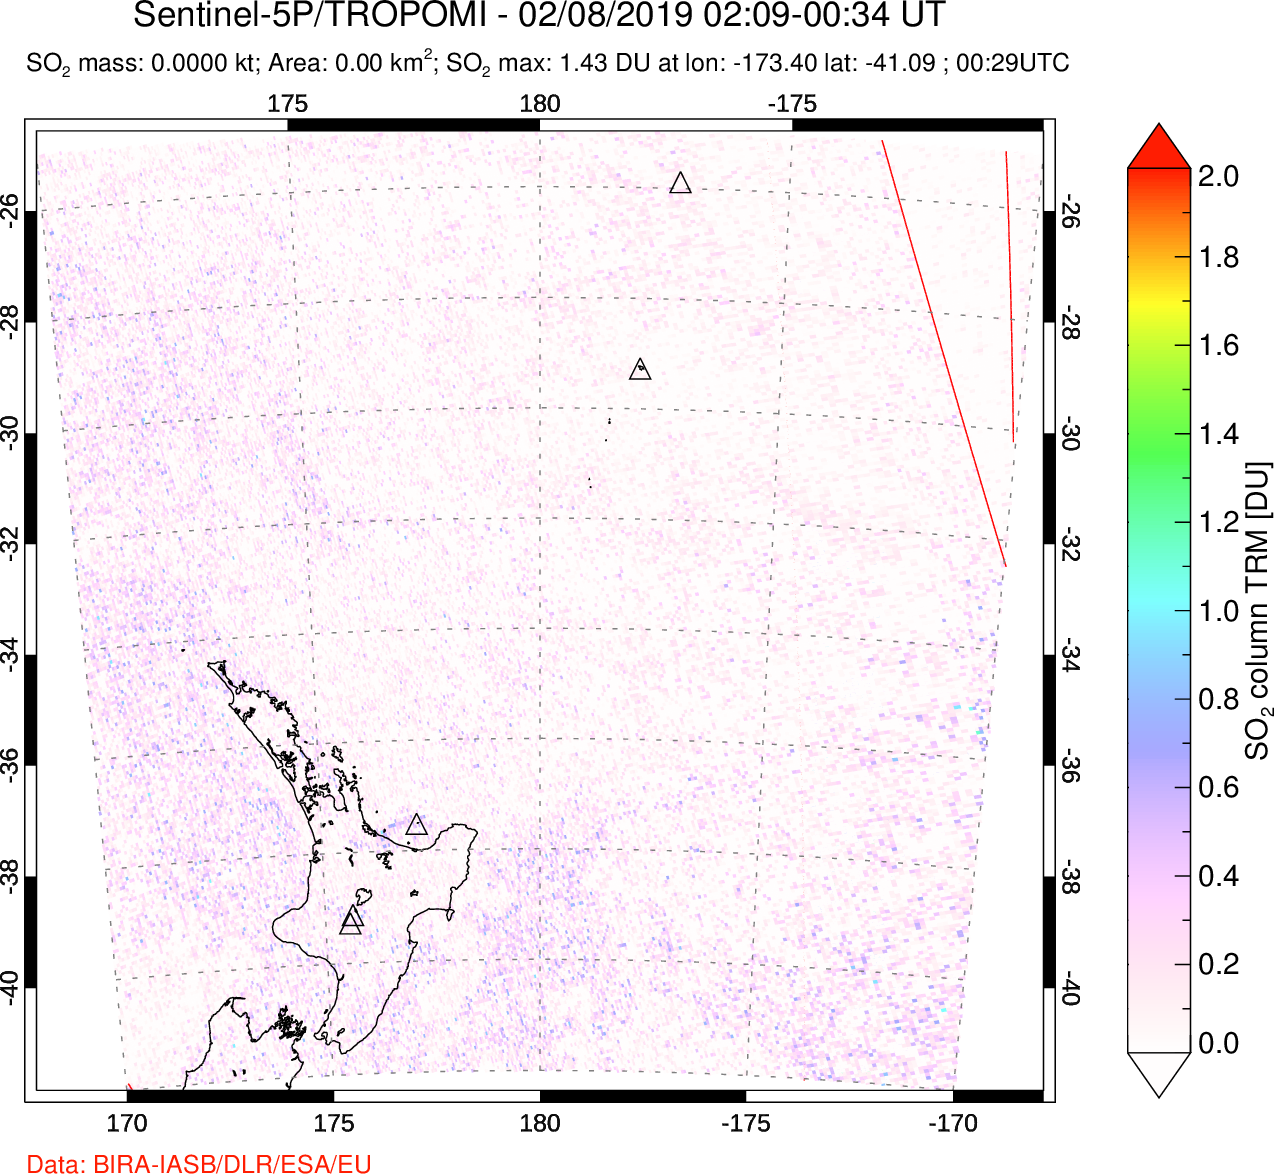 A sulfur dioxide image over New Zealand on Feb 08, 2019.